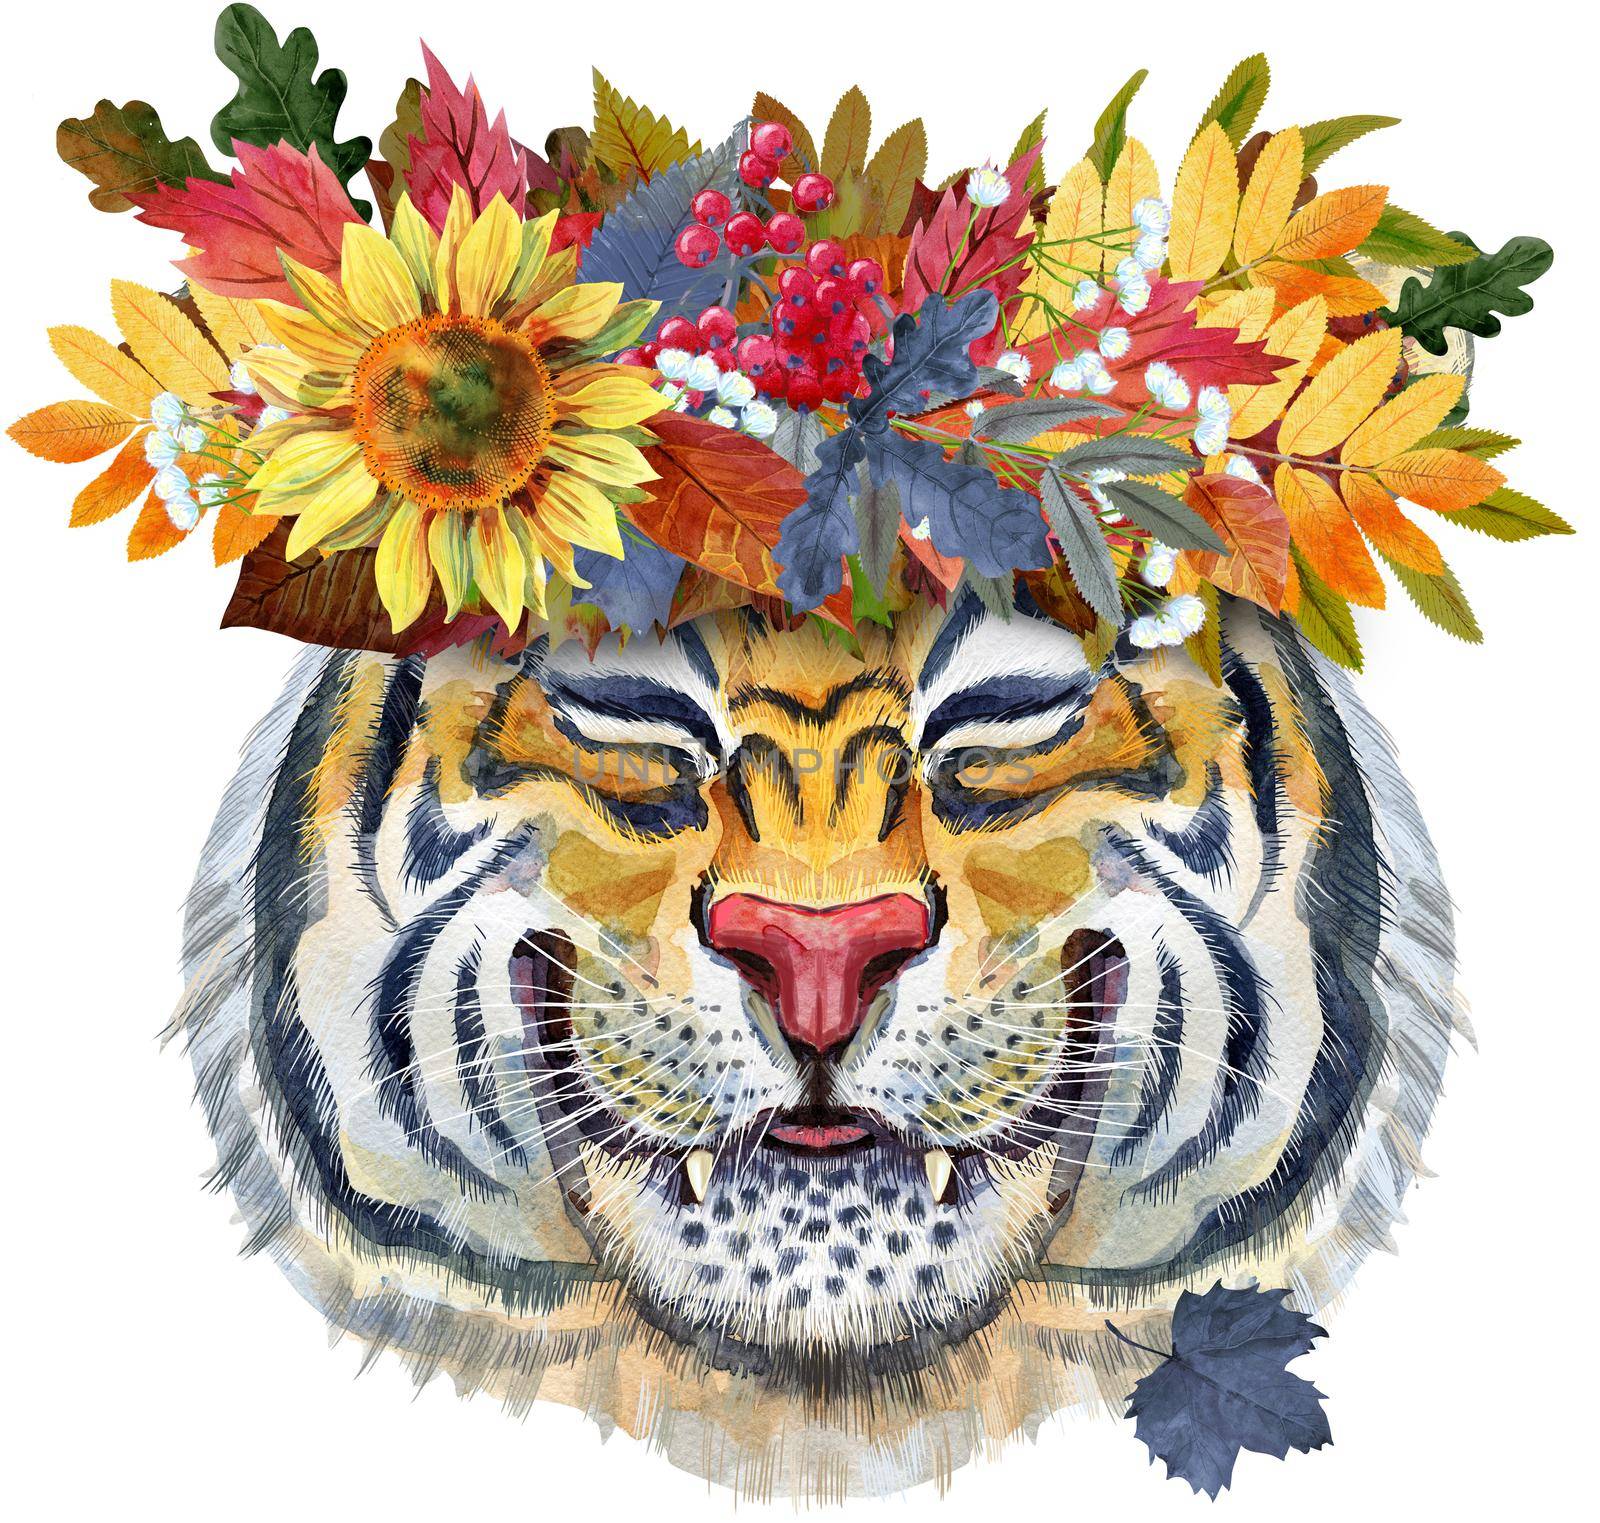 Colorful orange smiling tiger in a wreath of autumn leaves. Wild animal watercolor illustration on white background by NataOmsk